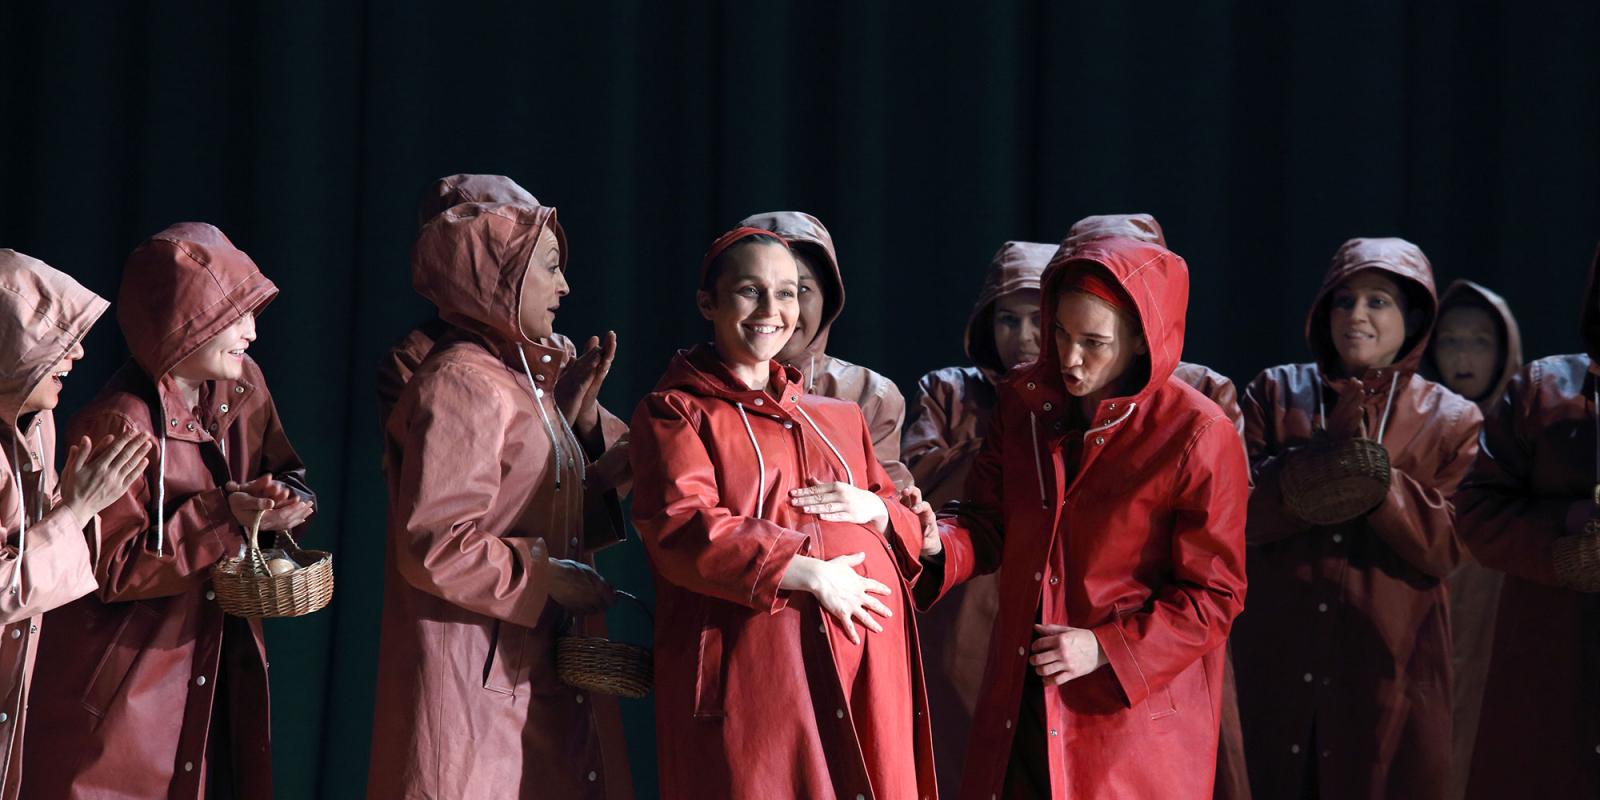 ENO2122 The Handmaid's Tale: Rhian Lois as Ofwarren, Kate Lindsey as Offred © Catherine Ashmore